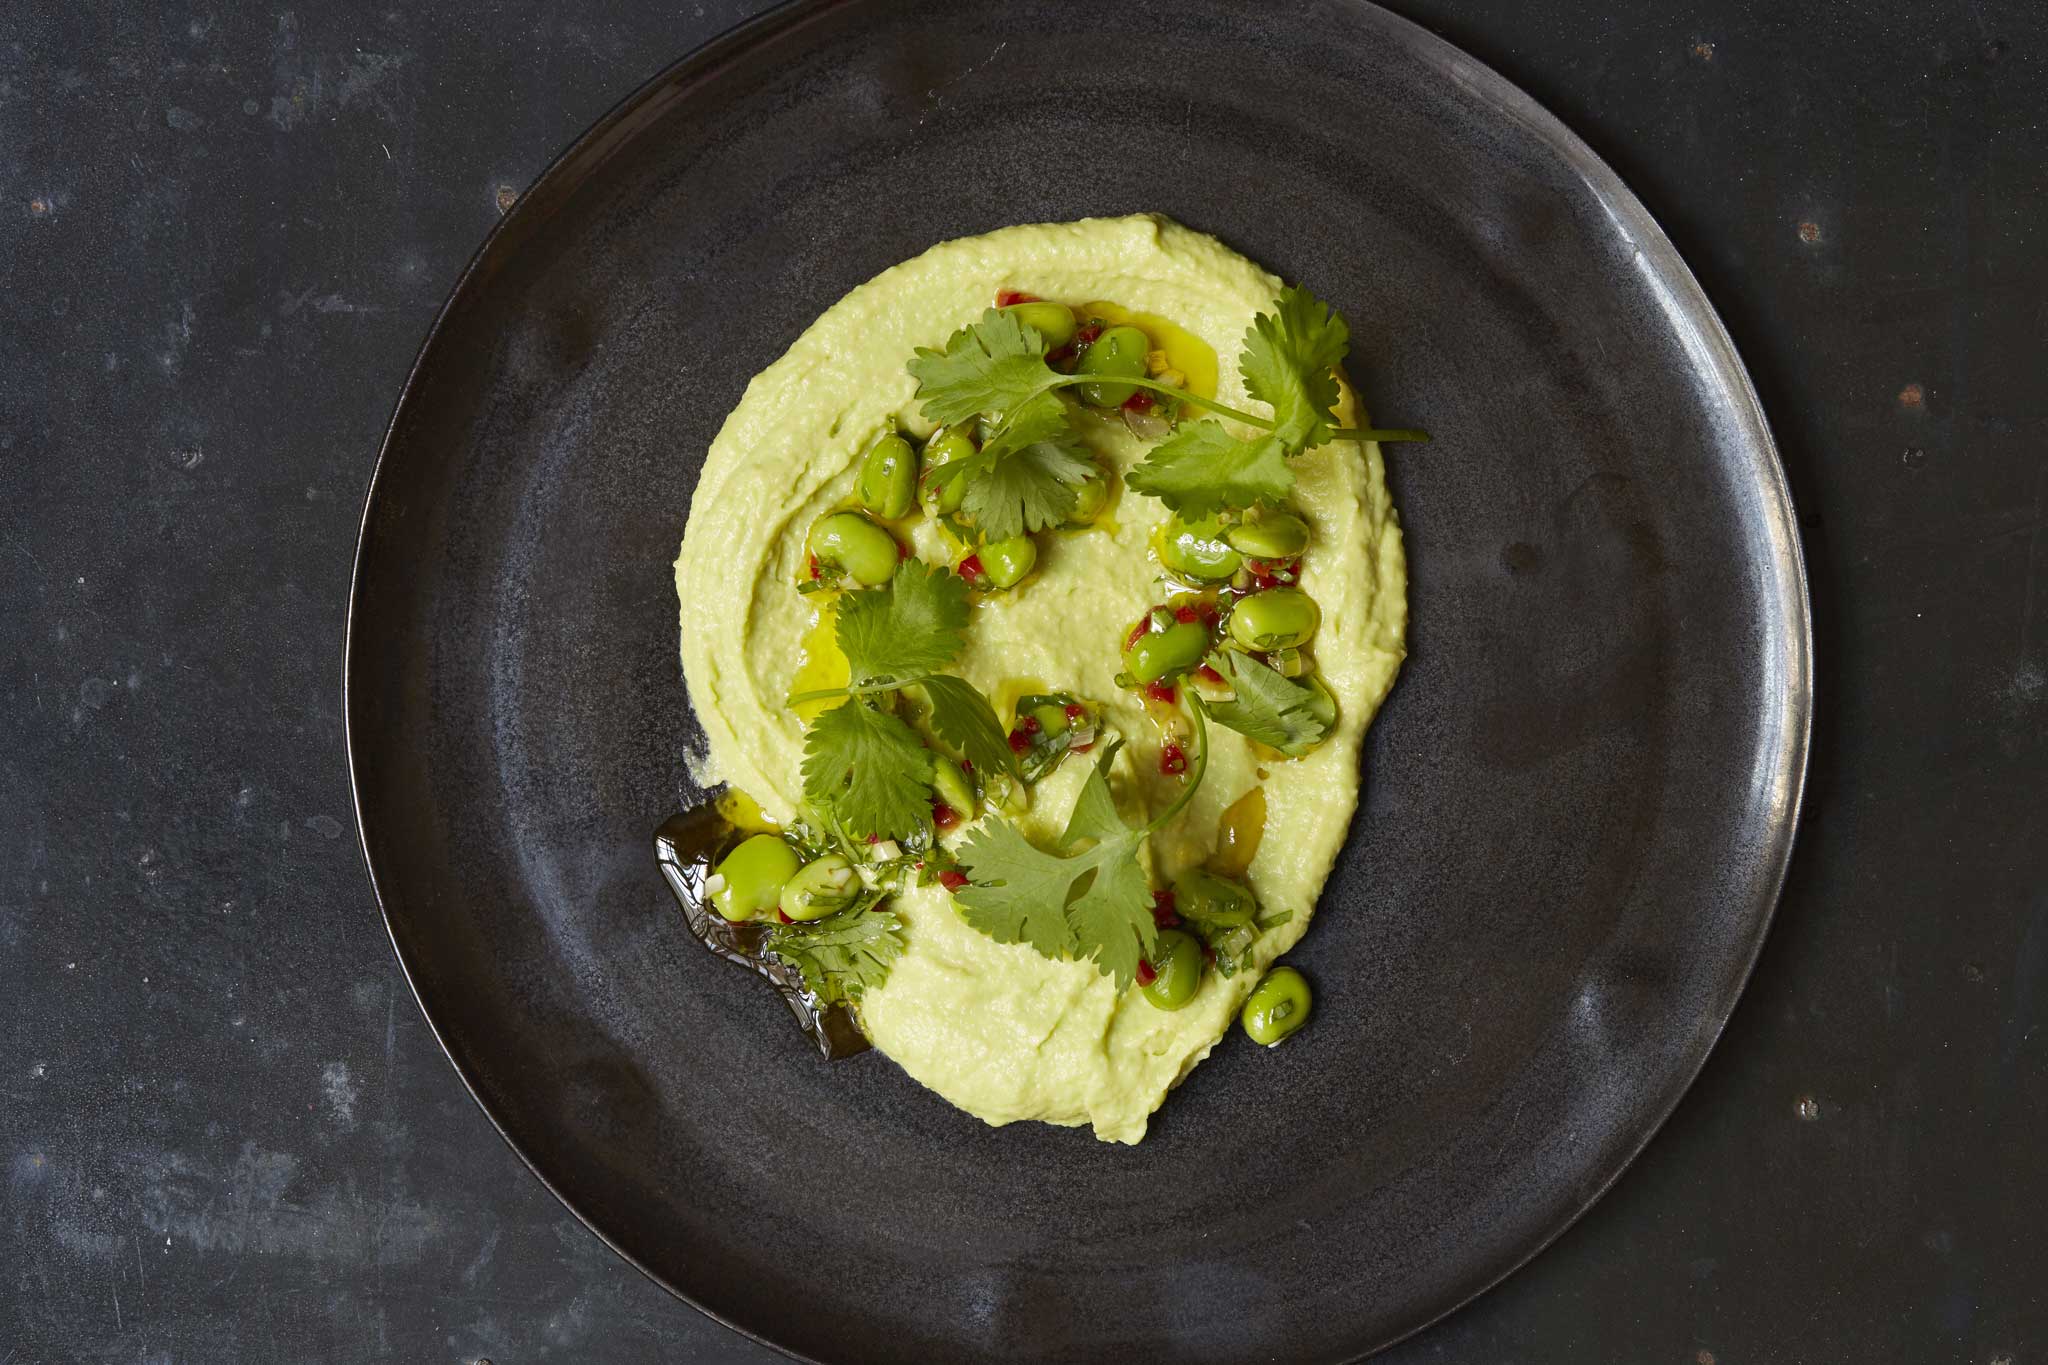 Mark's broad bean hummus is a great alternative to the traditional hummus most people buy from the supermarket